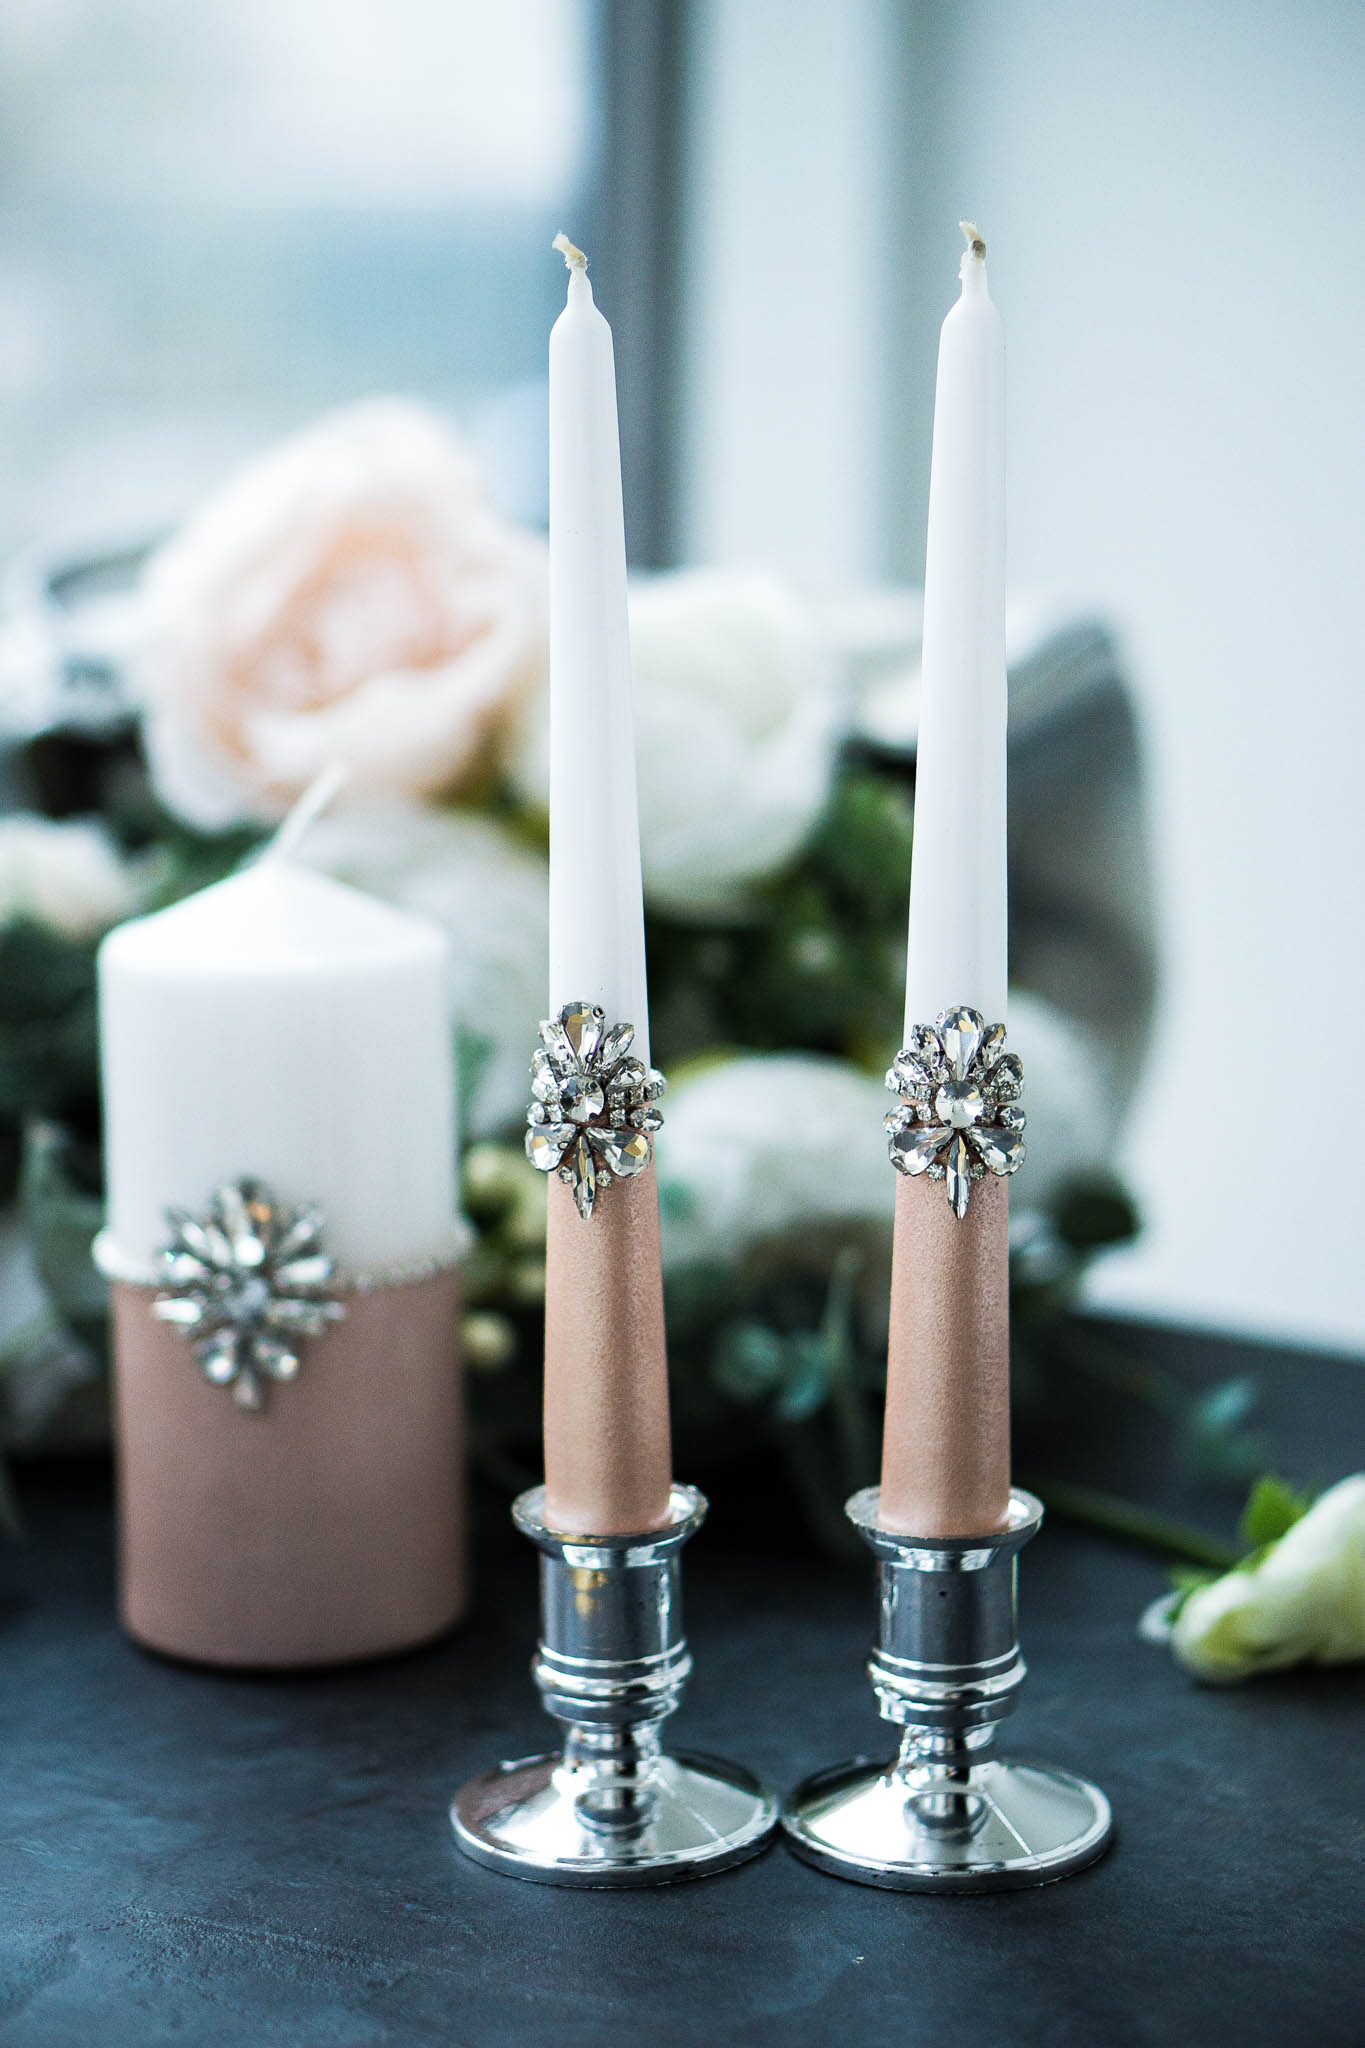 Handcrafted Amanda Unity Candle embellished with rose gold accents.